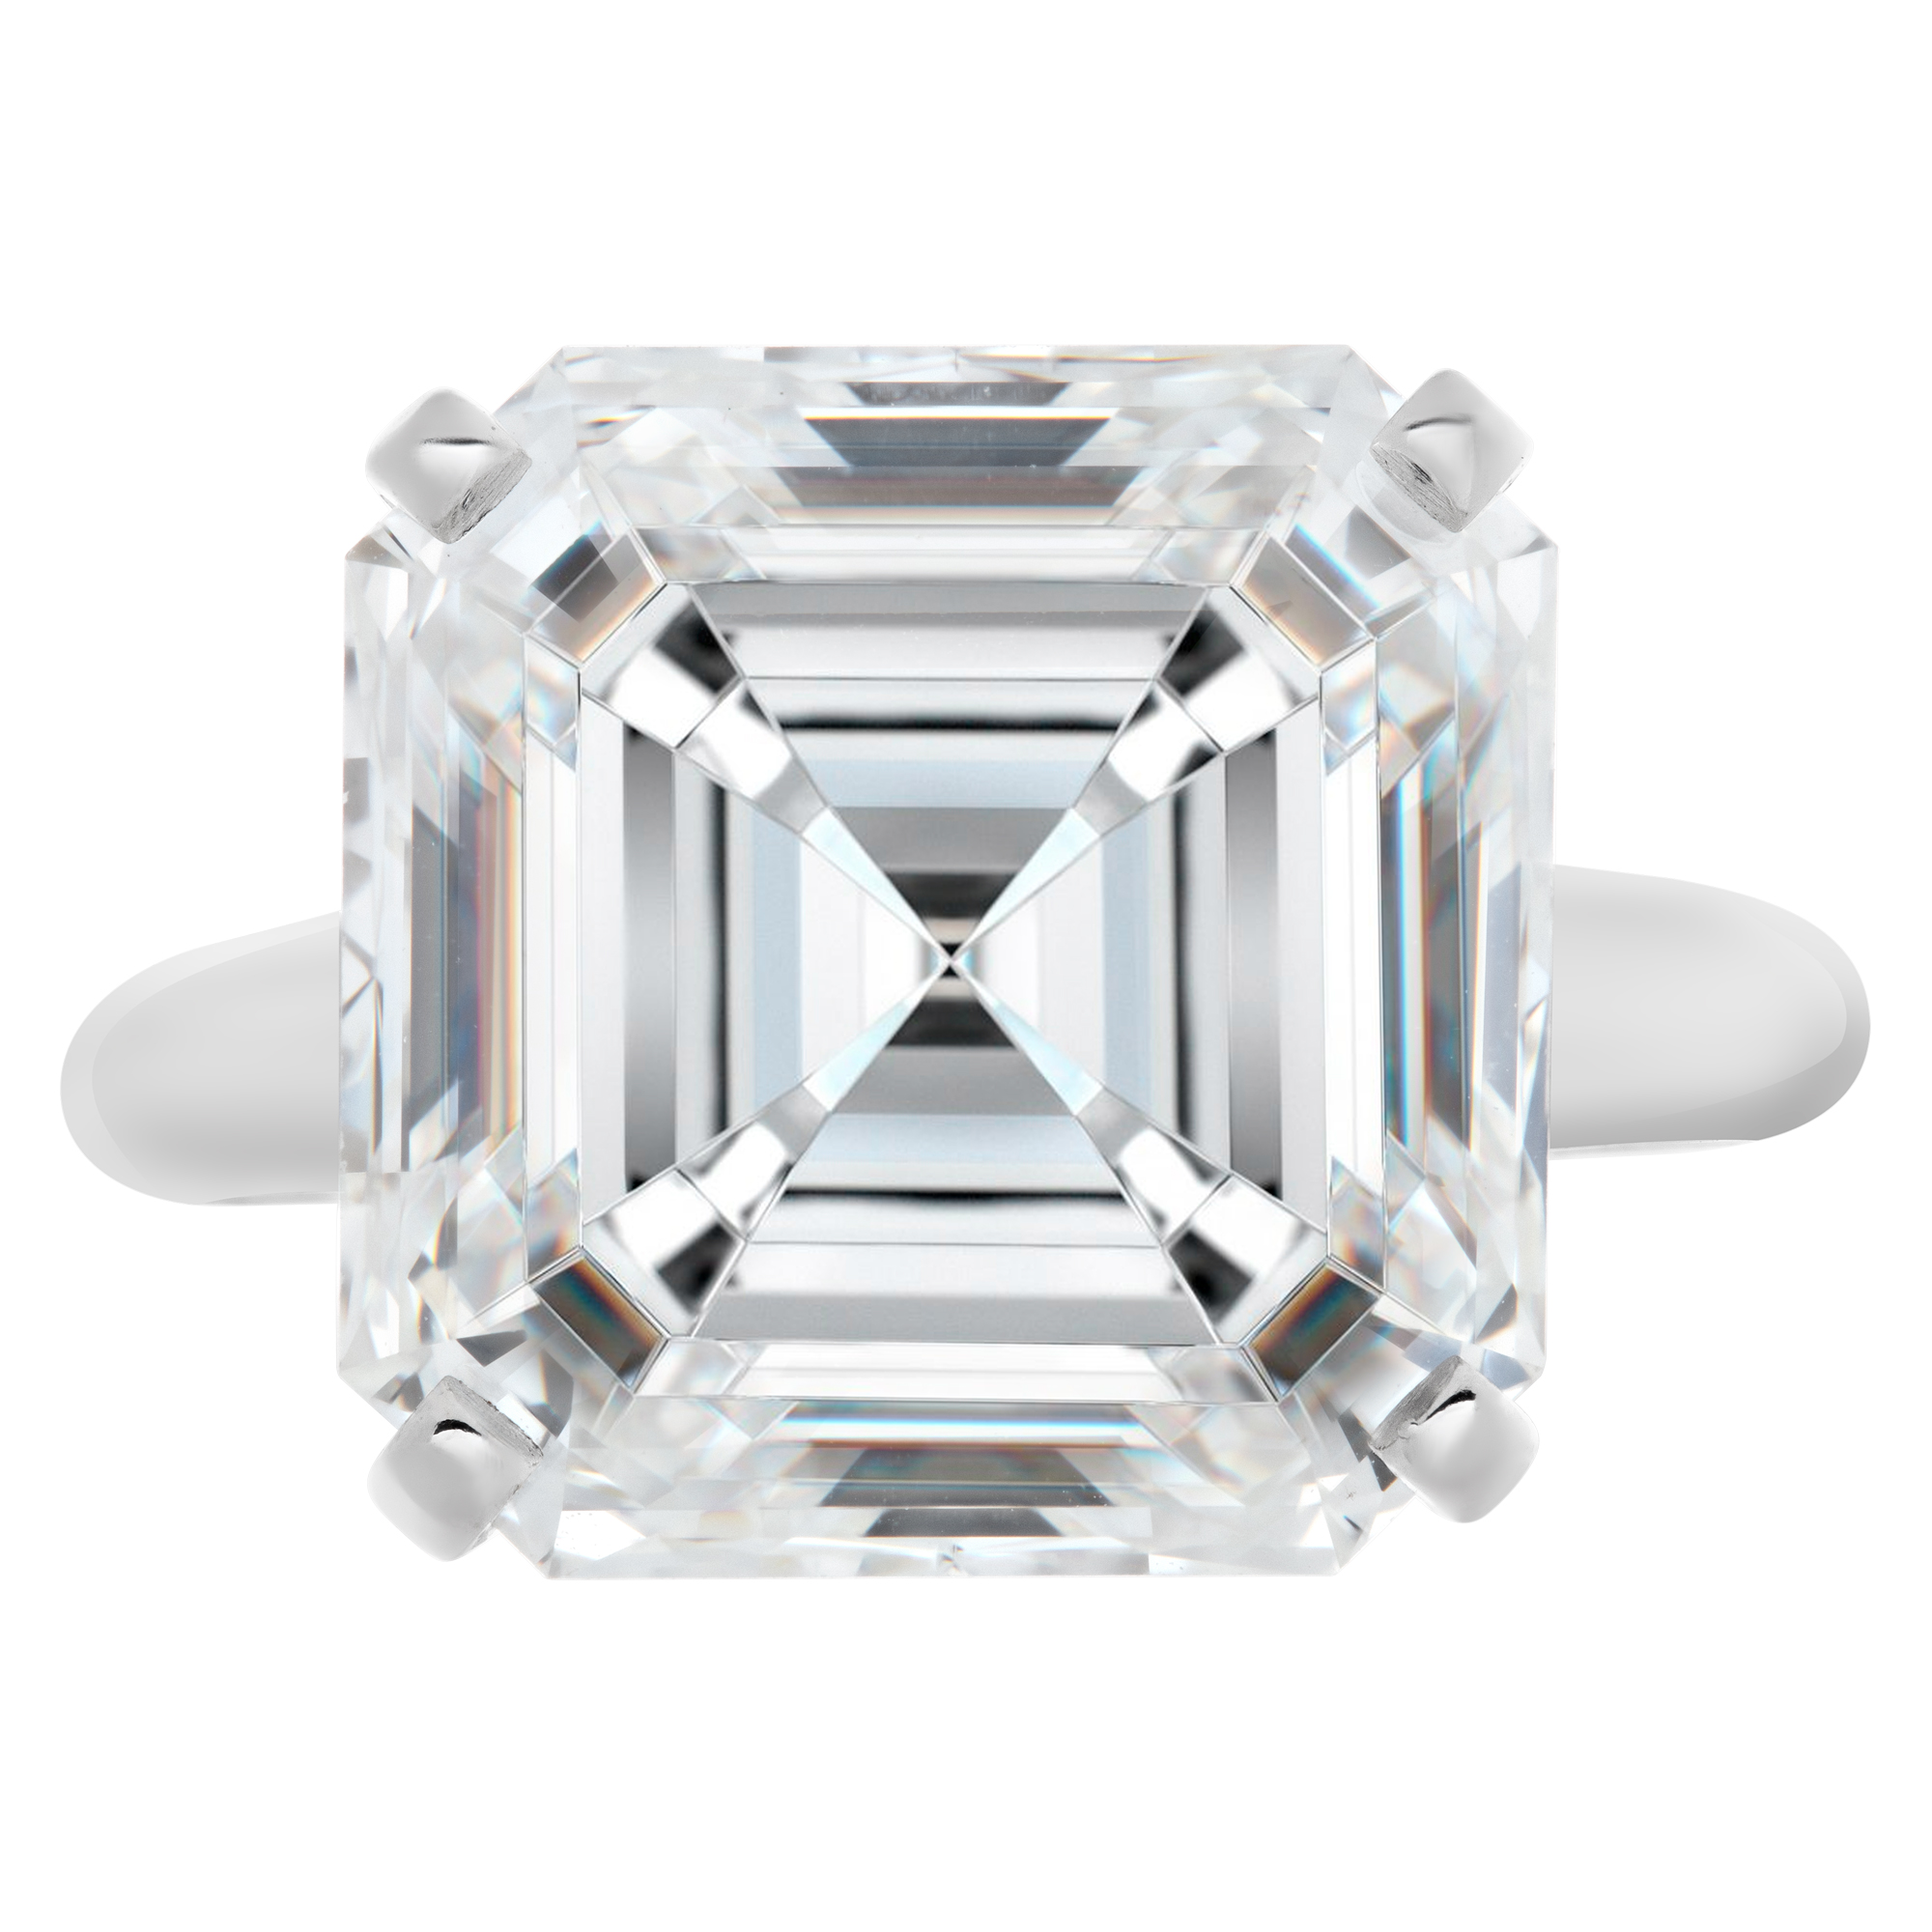 GIA certified asscher cut diamond 9.03 carat (G Color, Vs 1 Clarity) solitaire ring image 2